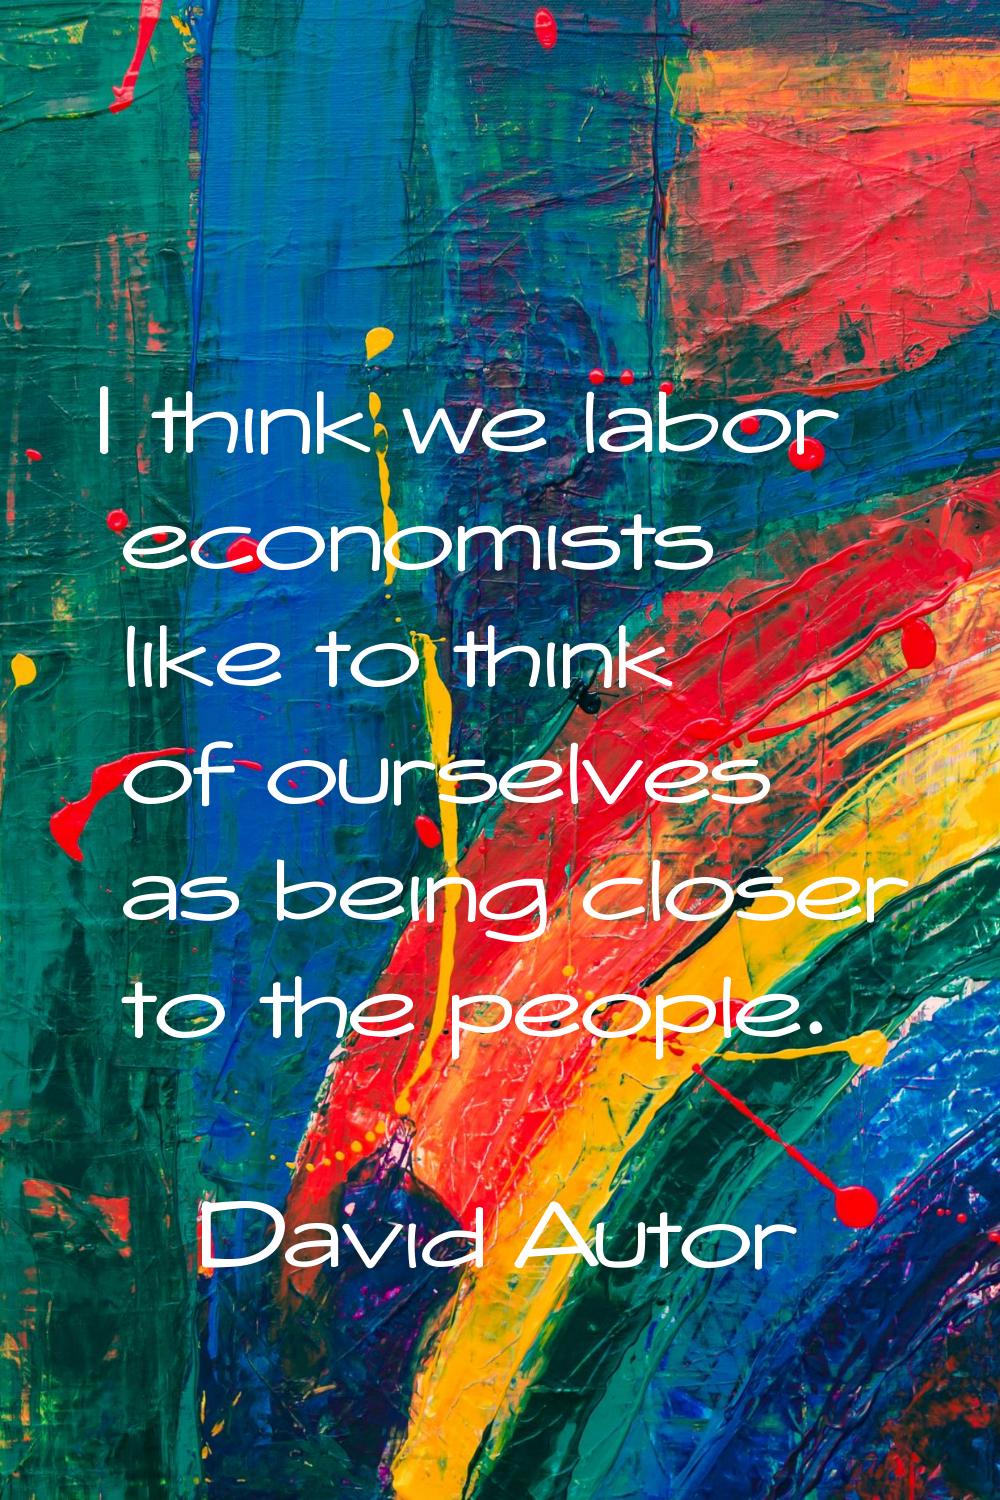 I think we labor economists like to think of ourselves as being closer to the people.